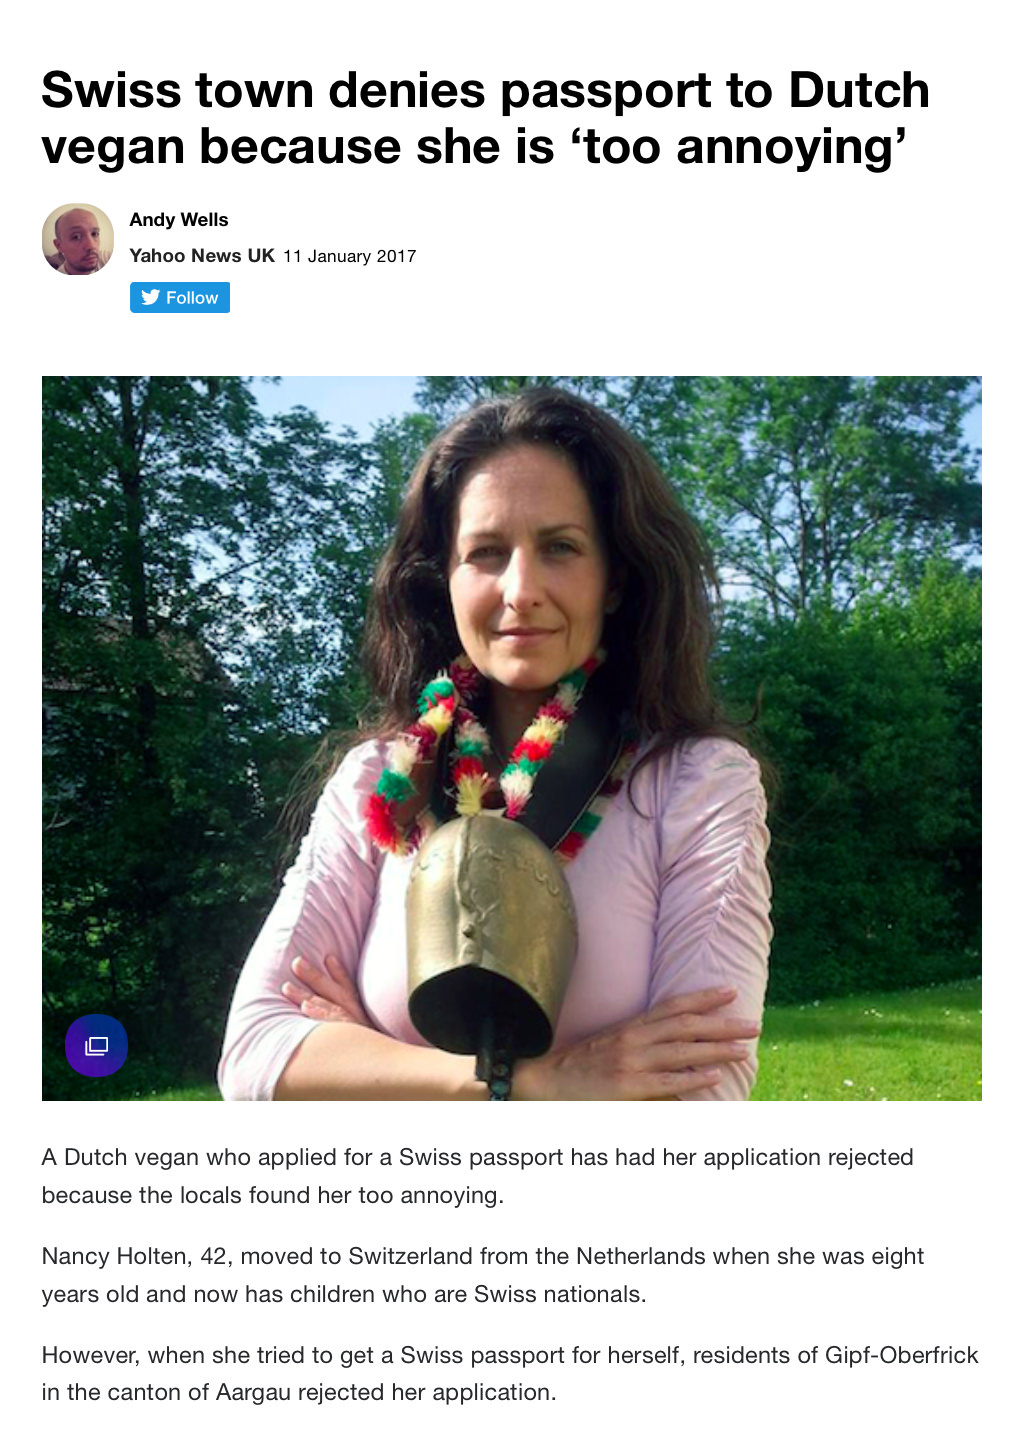 dutch woman refused passport for being too annoying - Swiss town denies passport to Dutch vegan because she is 'too annoying' Andy Wells Yahoo News Uk y A Dutch vegan who applied for a Swiss passport has had her application rejected because the locals fou